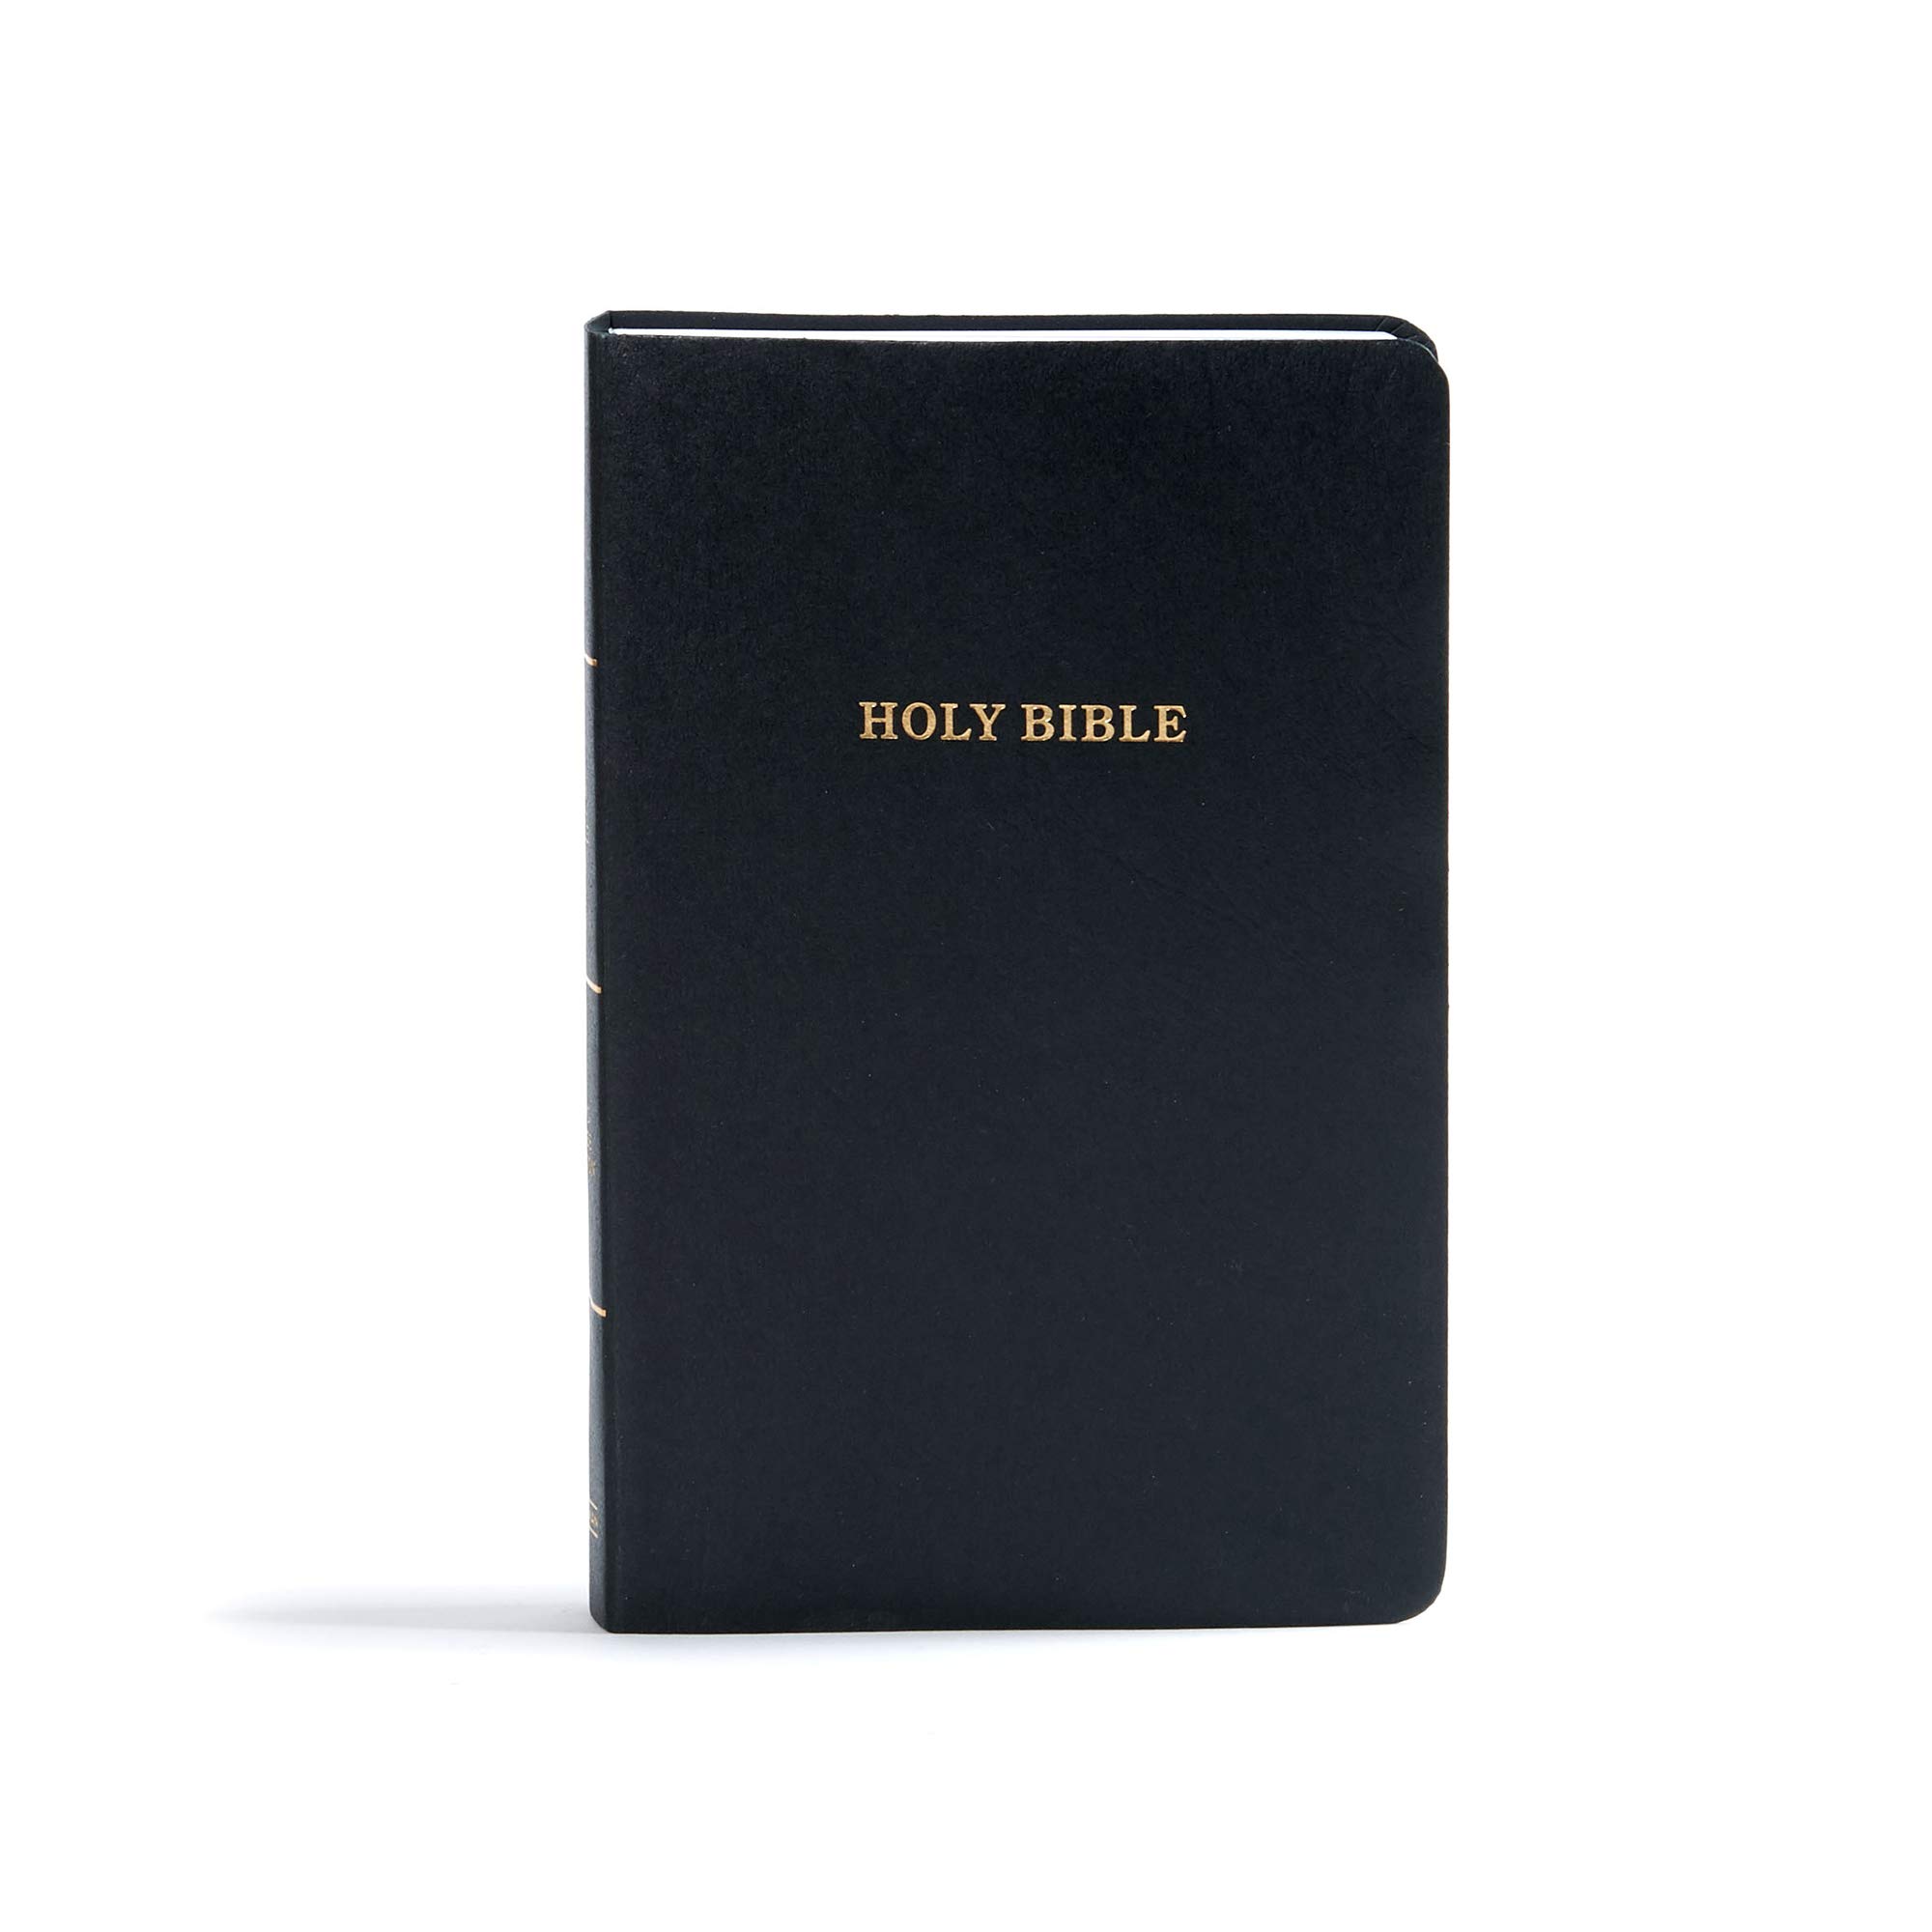 KJV Gift and Award Bible, Black Imitation Leather, Red Letter, Pure Cambridge Text, Presentation Page, Easy-to-Read Bible MCM Type